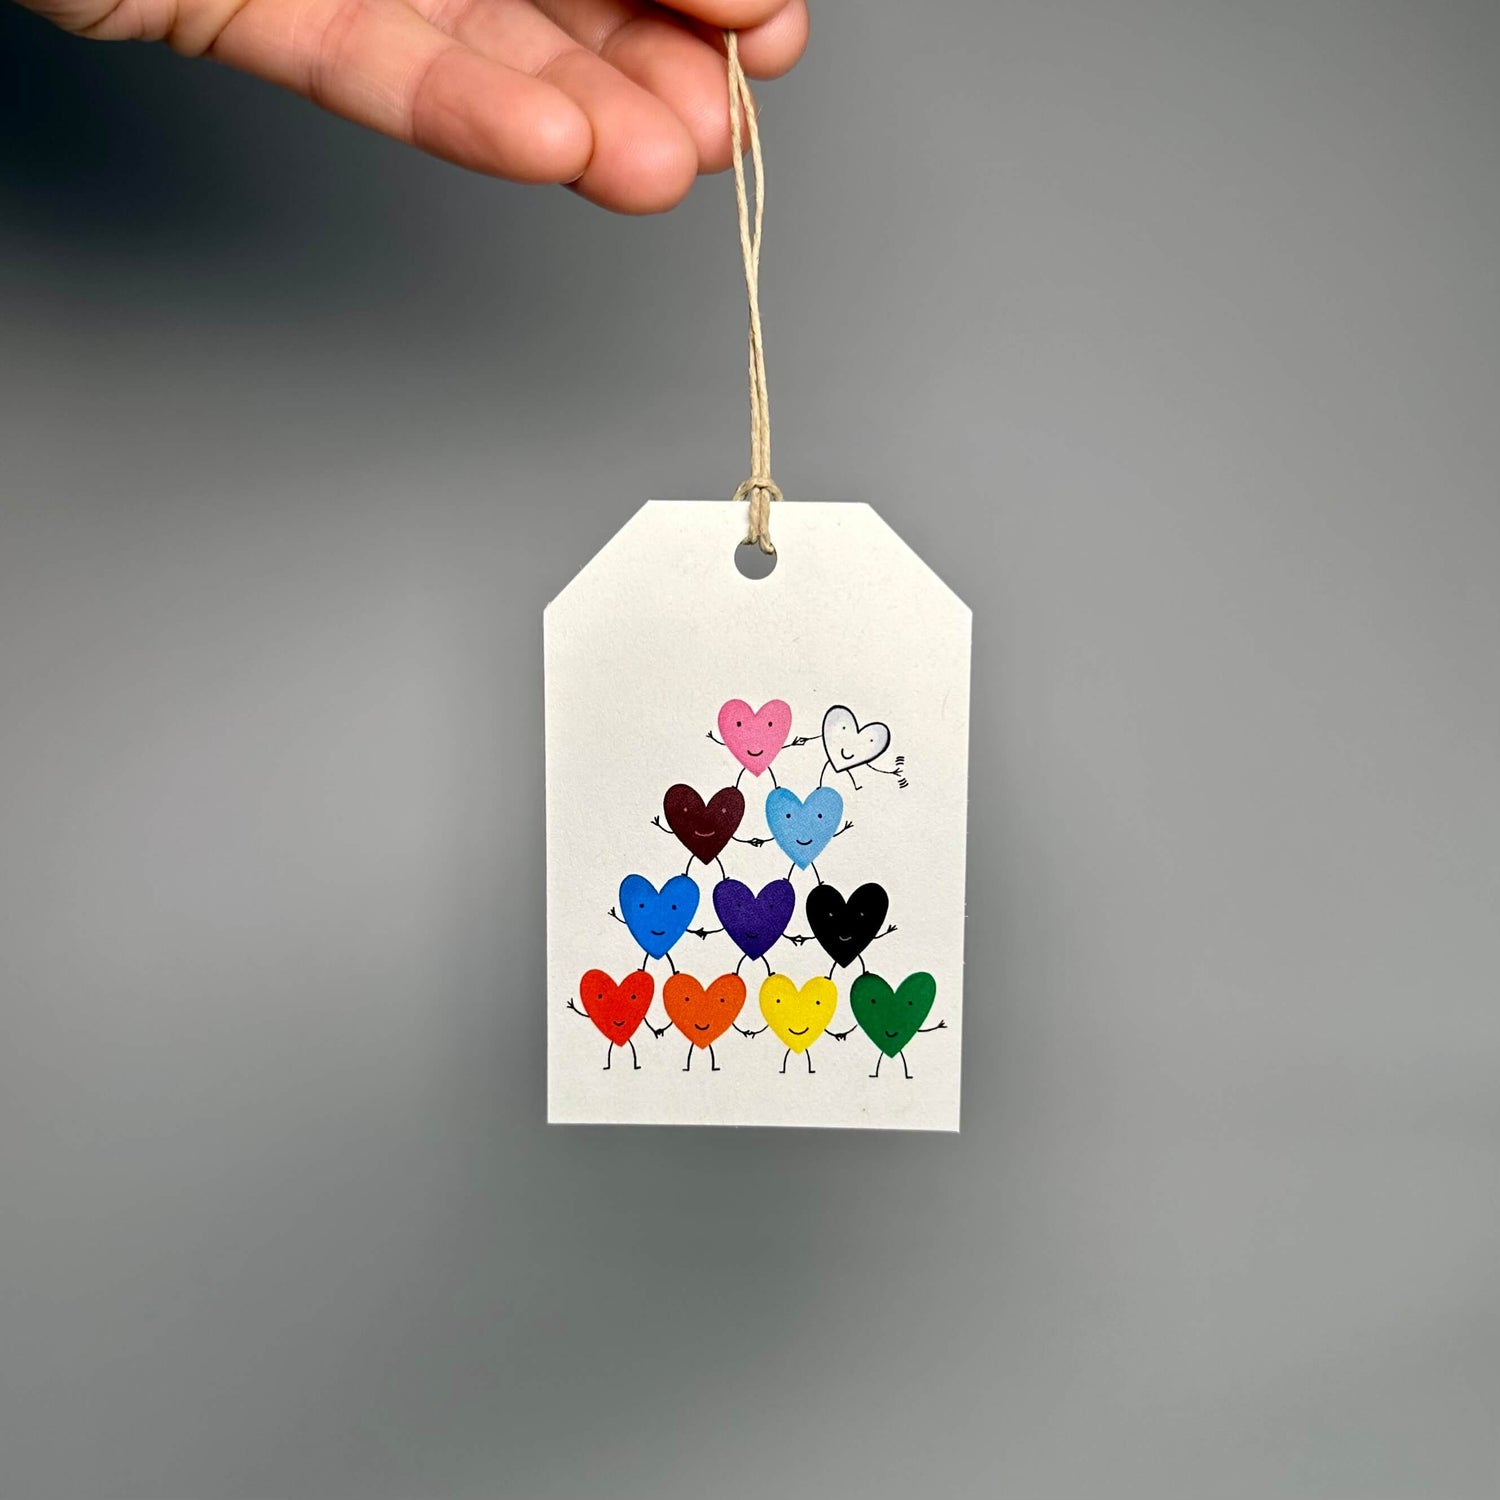 Gift tags with a hemp twine tie and rainbow heart pyramid design